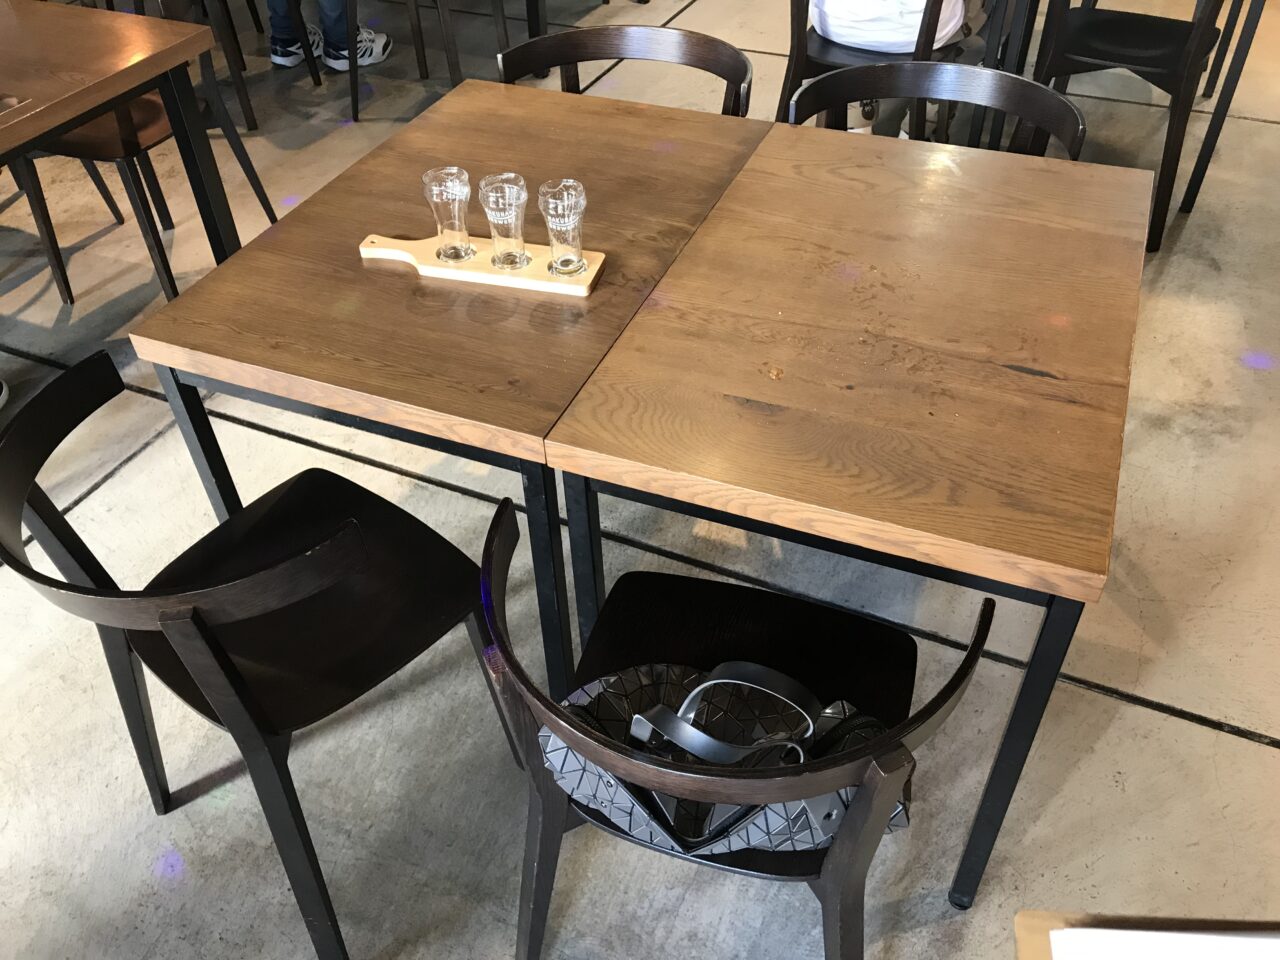 brewery_seats2